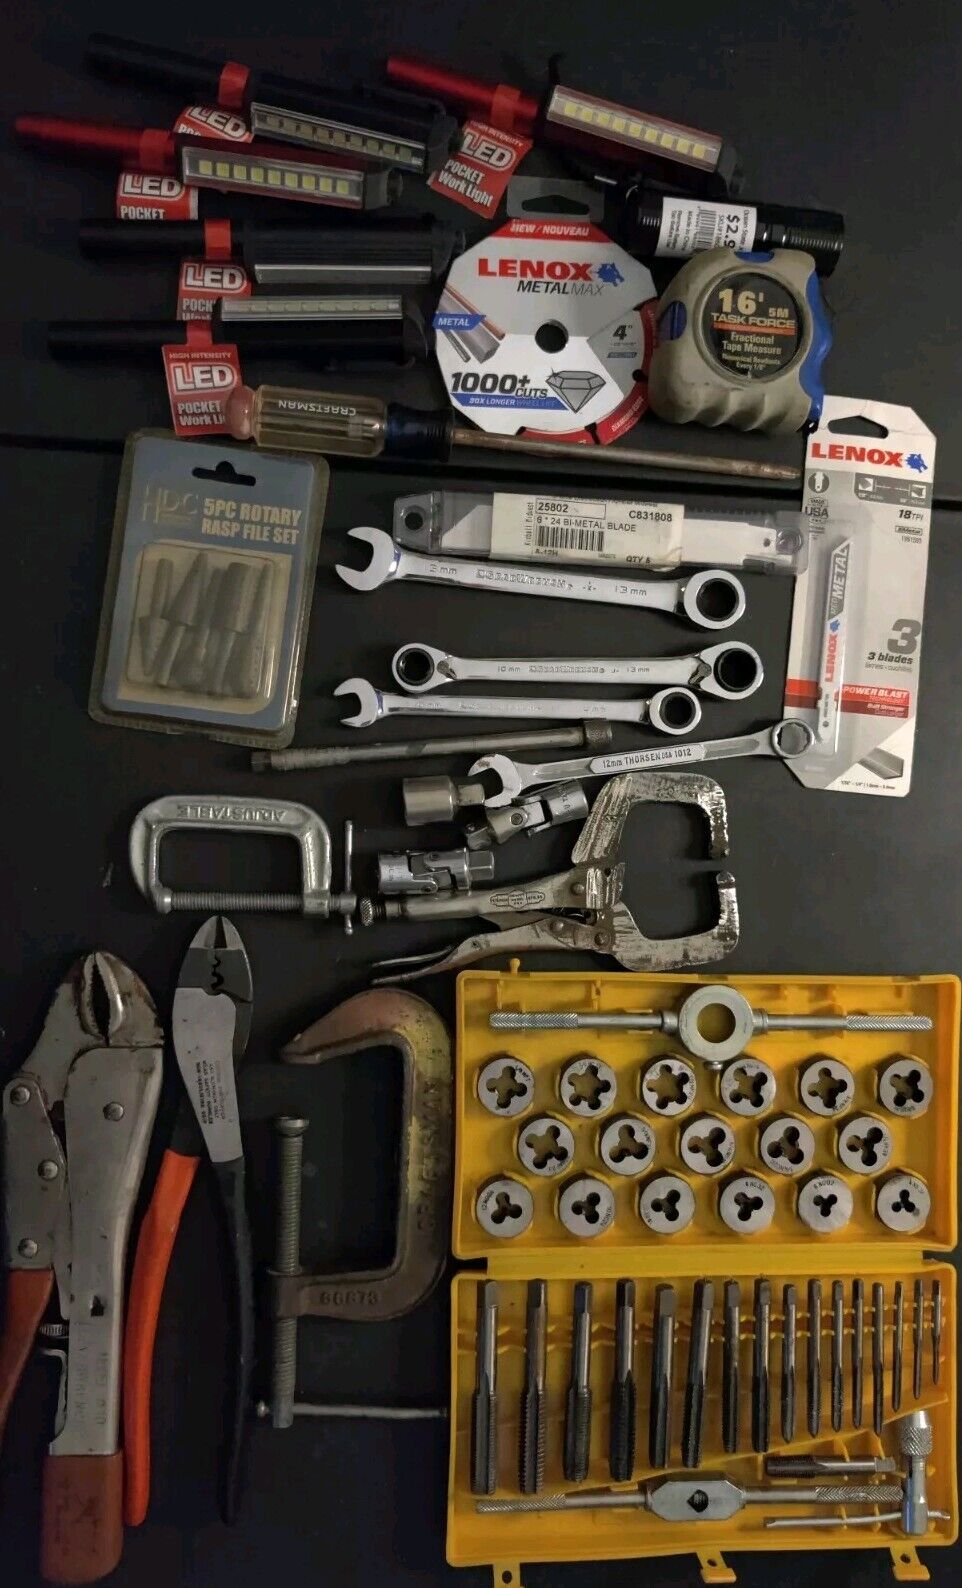 LARGE MISCELLANEOUS TOOLS LOT - NEW & USED USA - SPECIALTY TOOLS,ETC.